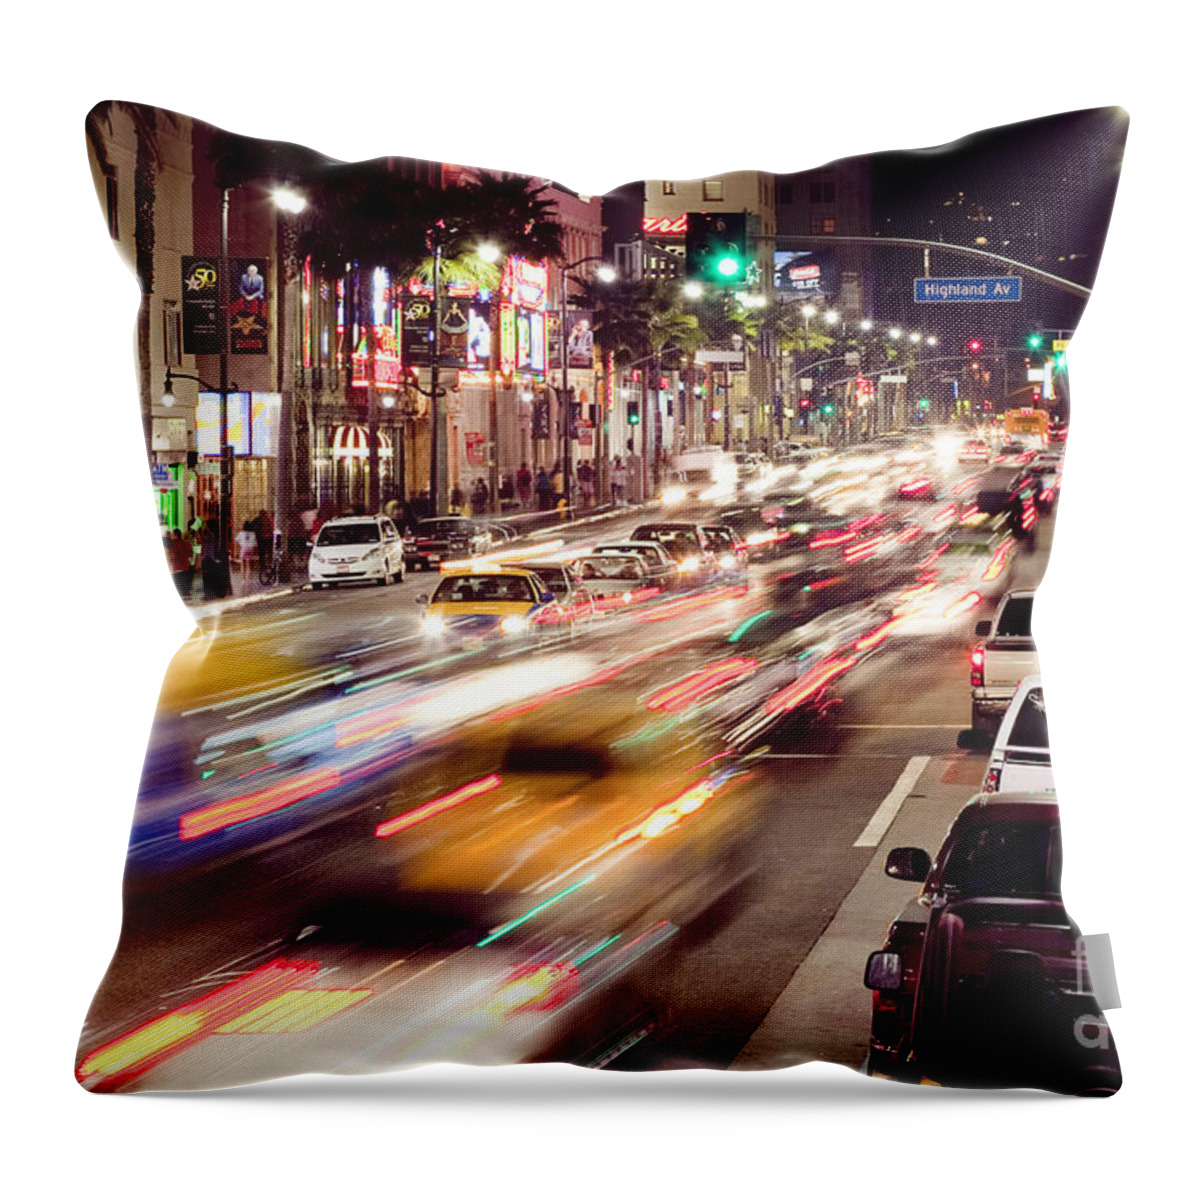 California Throw Pillow featuring the photograph Busy Hollywood Boulevard at Night by Bryan Mullennix